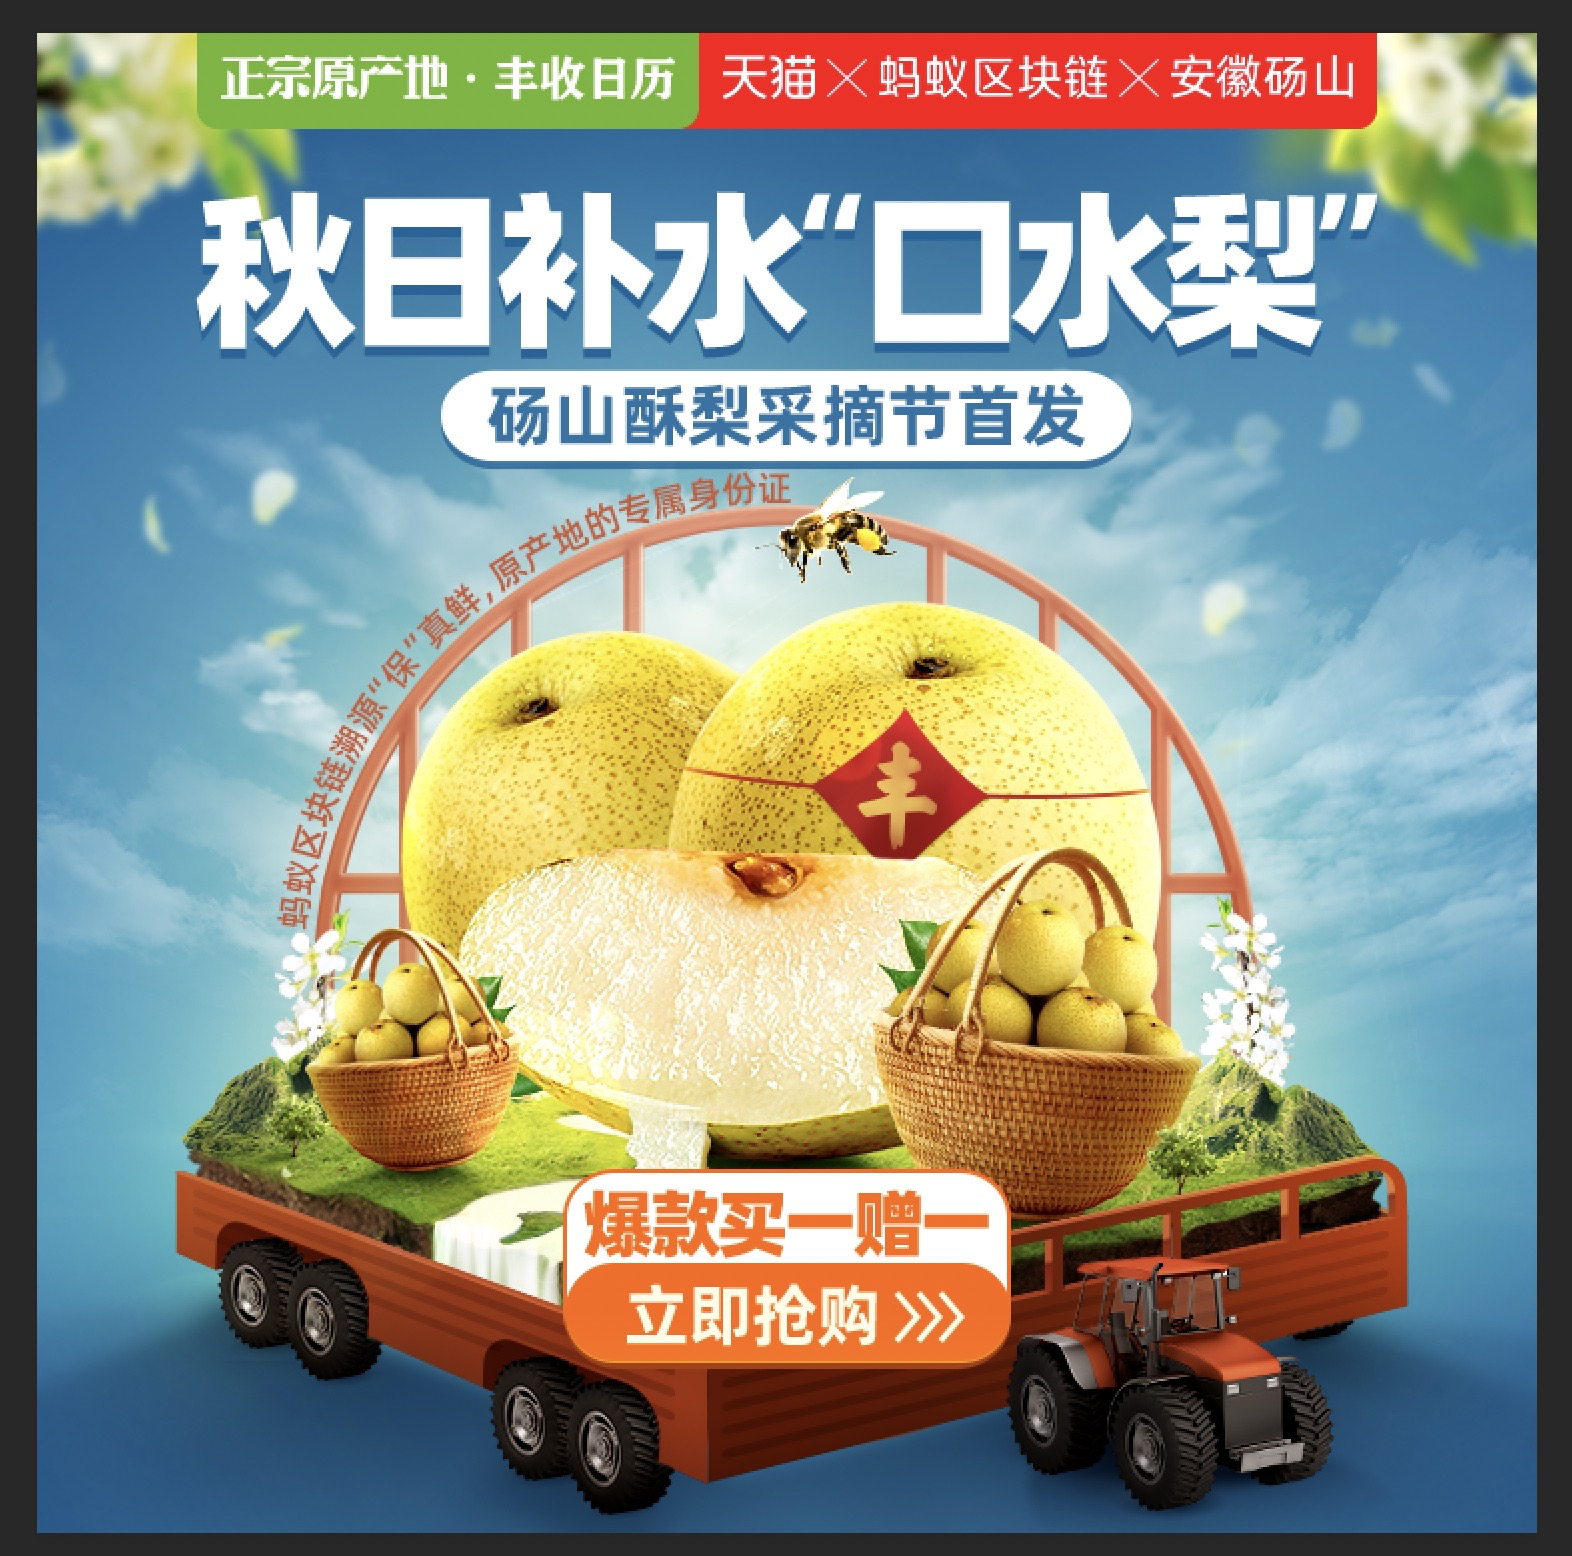 Alibaba uses blockchain to sell pears while Tencent applies it on diamonds